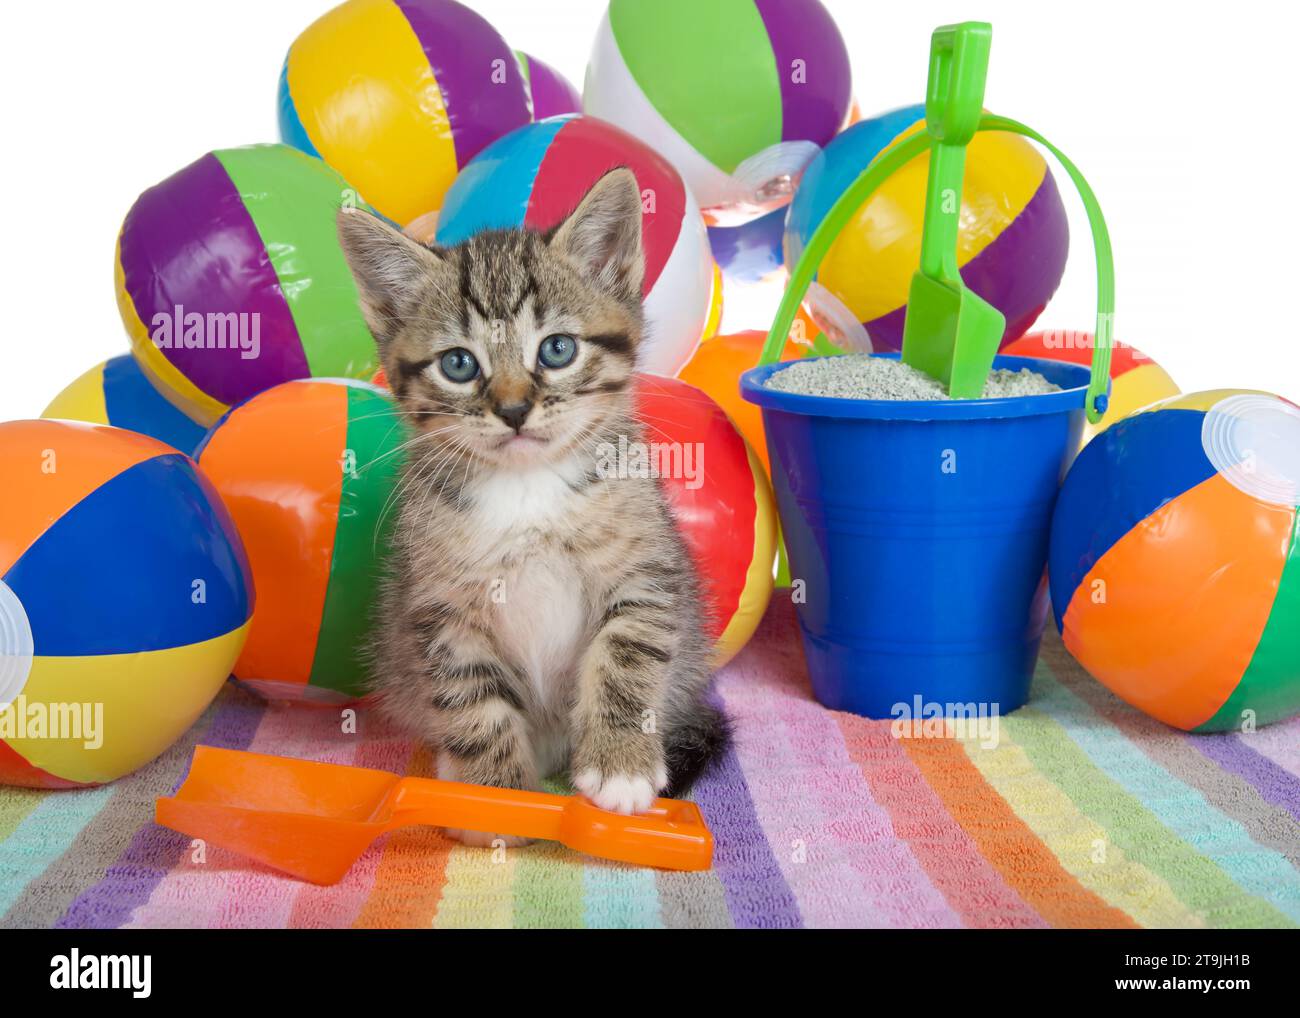 Adorable tabby kitten sitting on a colorful striped towel with small brightly colored beach balls piled up behind him. Sand bucket with shovel. Lookin Stock Photo